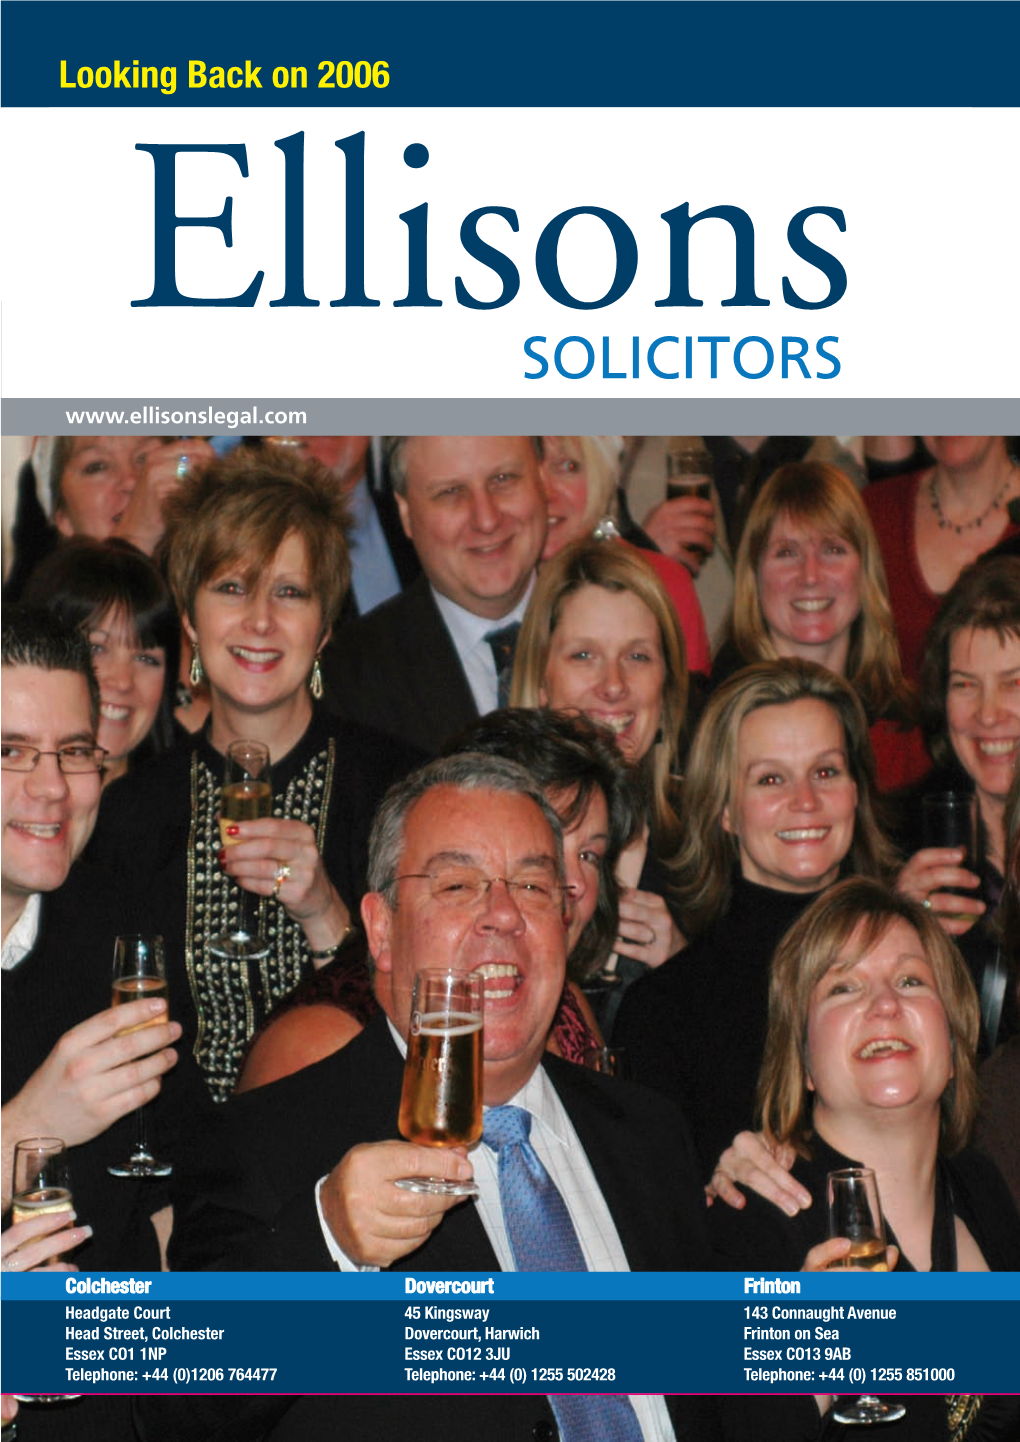 Looking Back on 2006 Ellisons SOLICITORS